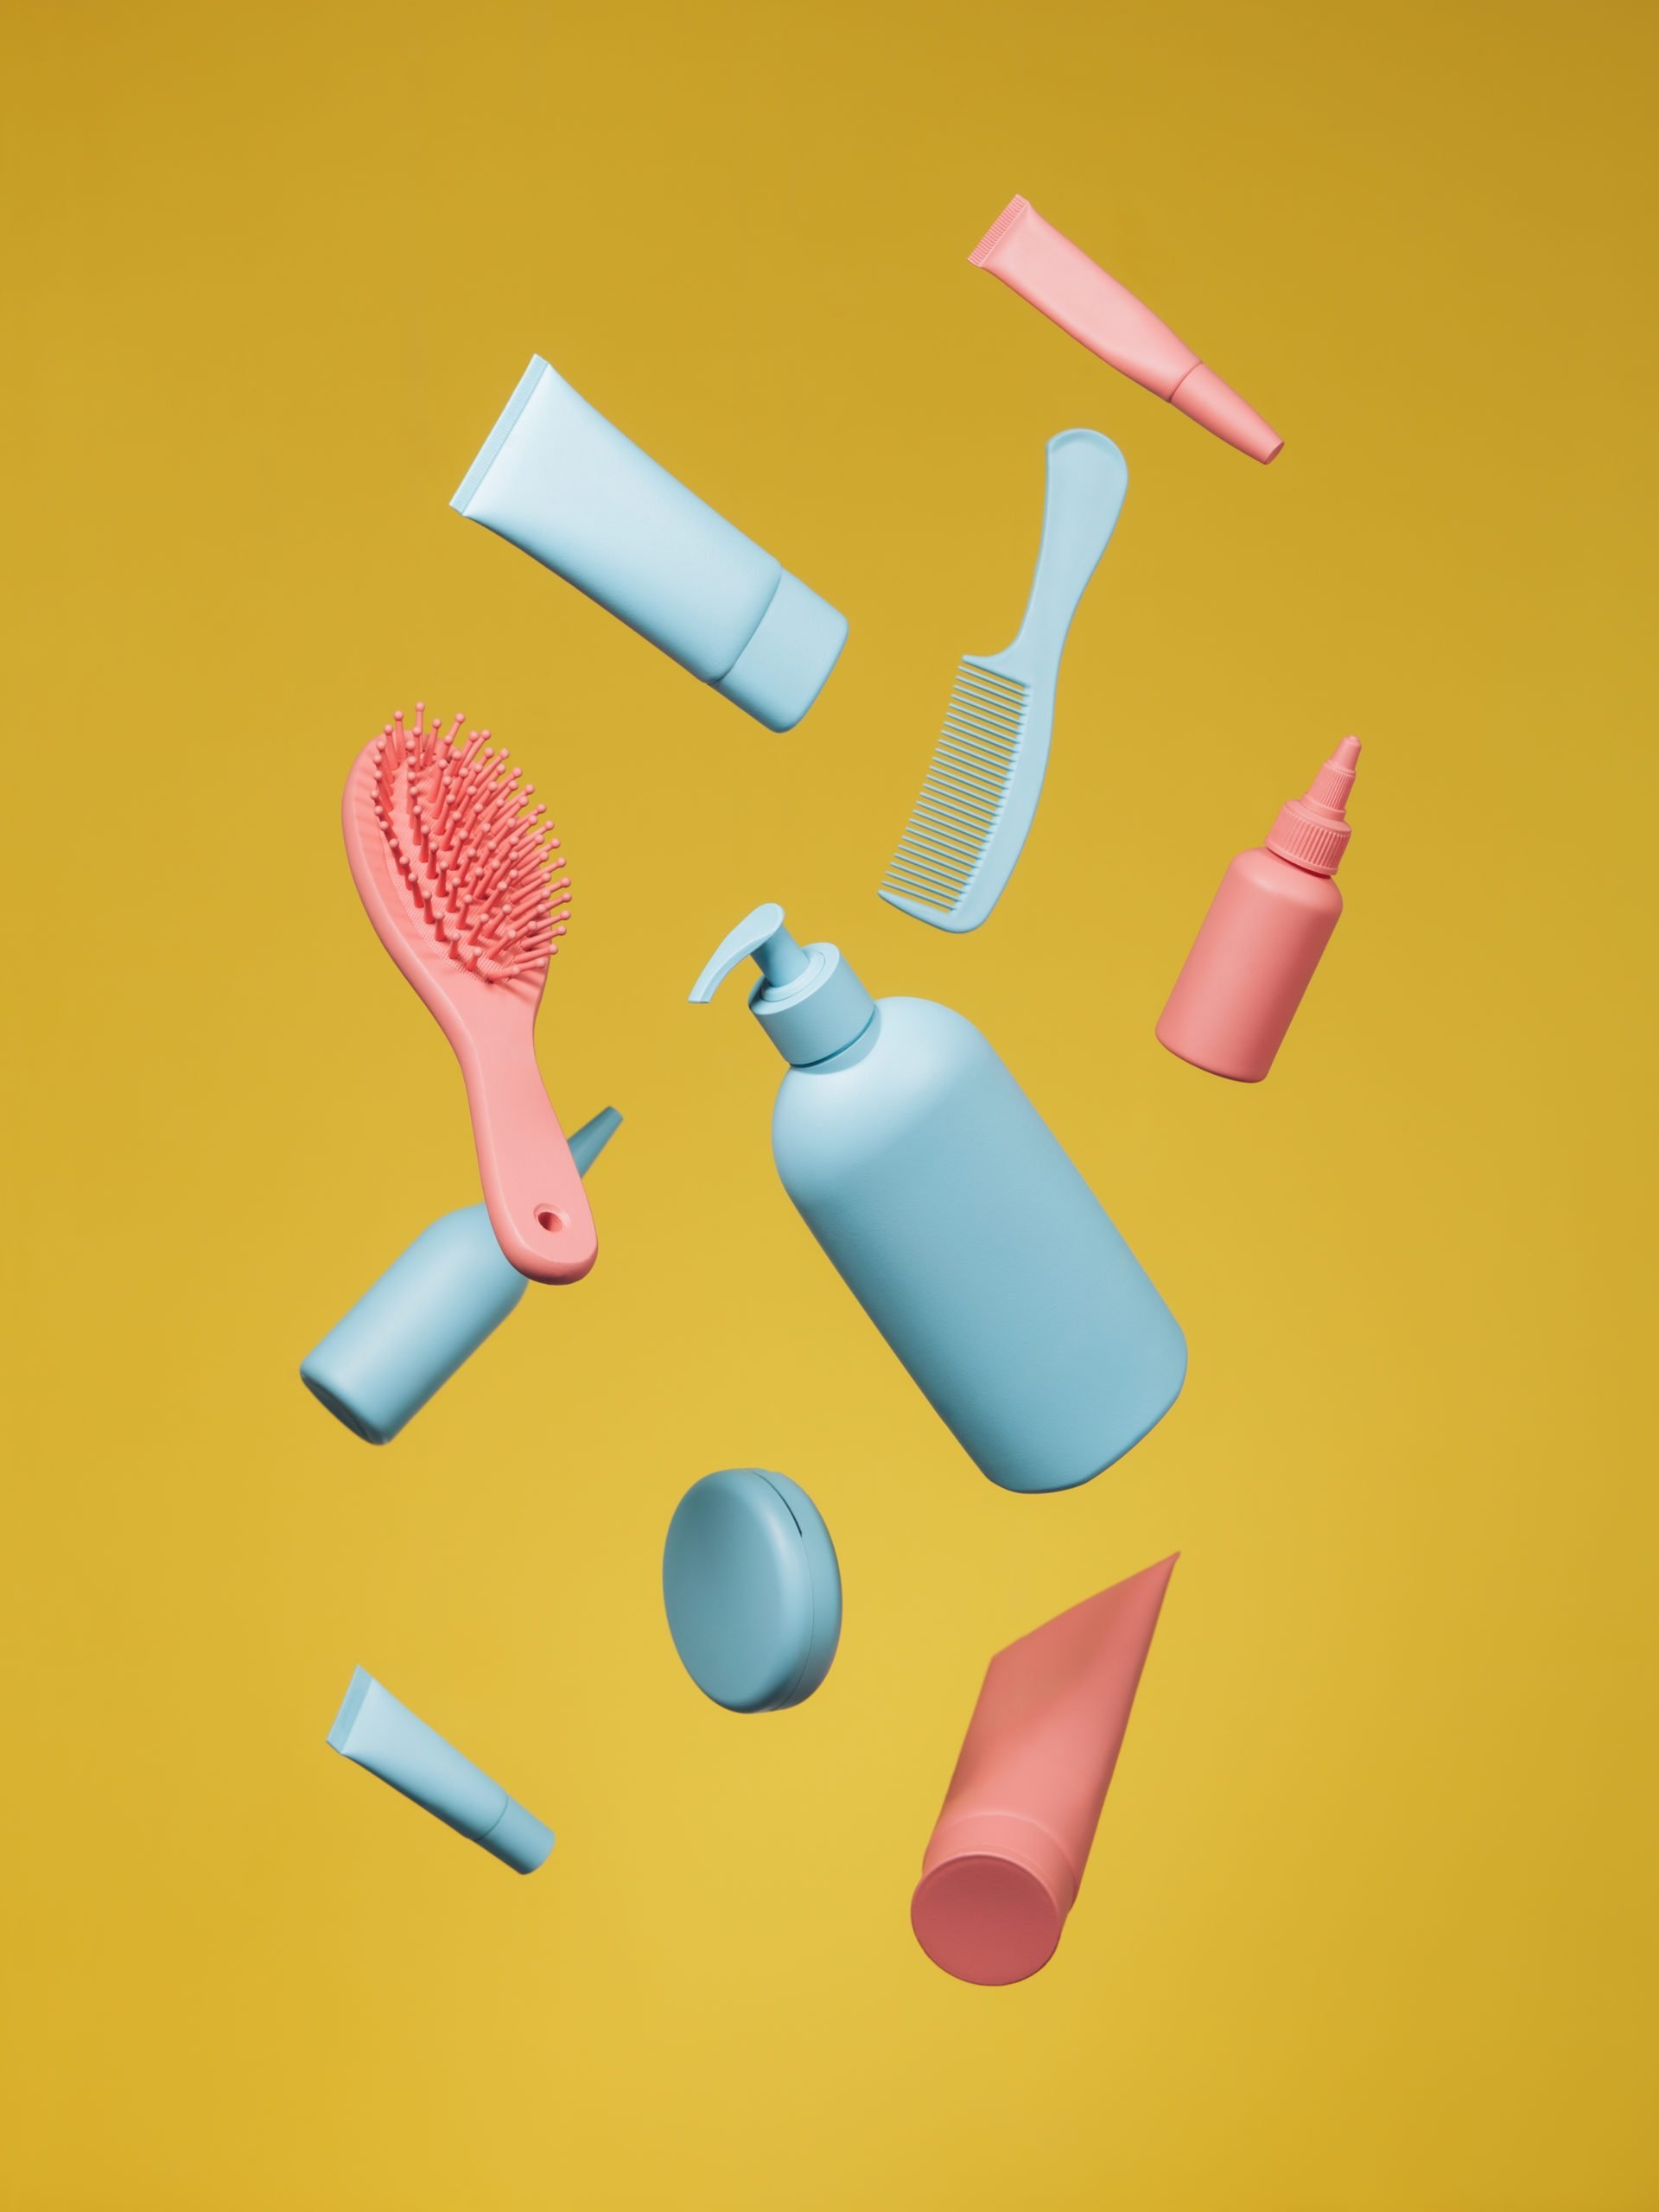 beauty products on yellow background